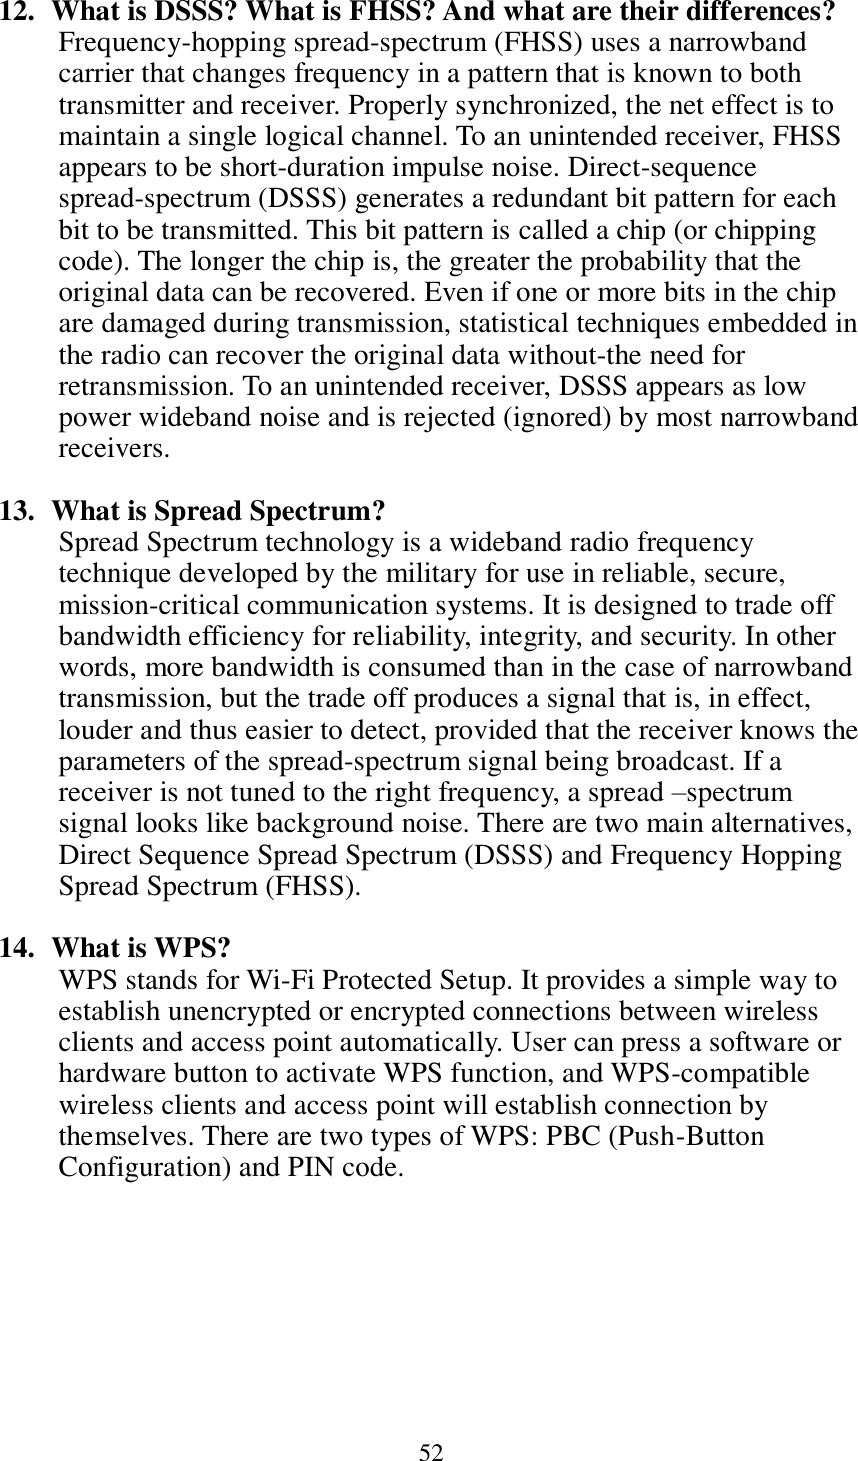 52  12.   What is DSSS? What is FHSS? And what are their differences? Frequency-hopping spread-spectrum (FHSS) uses a narrowband carrier that changes frequency in a pattern that is known to both transmitter and receiver. Properly synchronized, the net effect is to maintain a single logical channel. To an unintended receiver, FHSS appears to be short-duration impulse noise. Direct-sequence spread-spectrum (DSSS) generates a redundant bit pattern for each bit to be transmitted. This bit pattern is called a chip (or chipping code). The longer the chip is, the greater the probability that the original data can be recovered. Even if one or more bits in the chip are damaged during transmission, statistical techniques embedded in the radio can recover the original data without-the need for retransmission. To an unintended receiver, DSSS appears as low power wideband noise and is rejected (ignored) by most narrowband receivers.  13.   What is Spread Spectrum? Spread Spectrum technology is a wideband radio frequency technique developed by the military for use in reliable, secure, mission-critical communication systems. It is designed to trade off bandwidth efficiency for reliability, integrity, and security. In other words, more bandwidth is consumed than in the case of narrowband transmission, but the trade off produces a signal that is, in effect, louder and thus easier to detect, provided that the receiver knows the parameters of the spread-spectrum signal being broadcast. If a receiver is not tuned to the right frequency, a spread –spectrum signal looks like background noise. There are two main alternatives, Direct Sequence Spread Spectrum (DSSS) and Frequency Hopping Spread Spectrum (FHSS).  14.   What is WPS? WPS stands for Wi-Fi Protected Setup. It provides a simple way to establish unencrypted or encrypted connections between wireless clients and access point automatically. User can press a software or hardware button to activate WPS function, and WPS-compatible wireless clients and access point will establish connection by themselves. There are two types of WPS: PBC (Push-Button Configuration) and PIN code.  